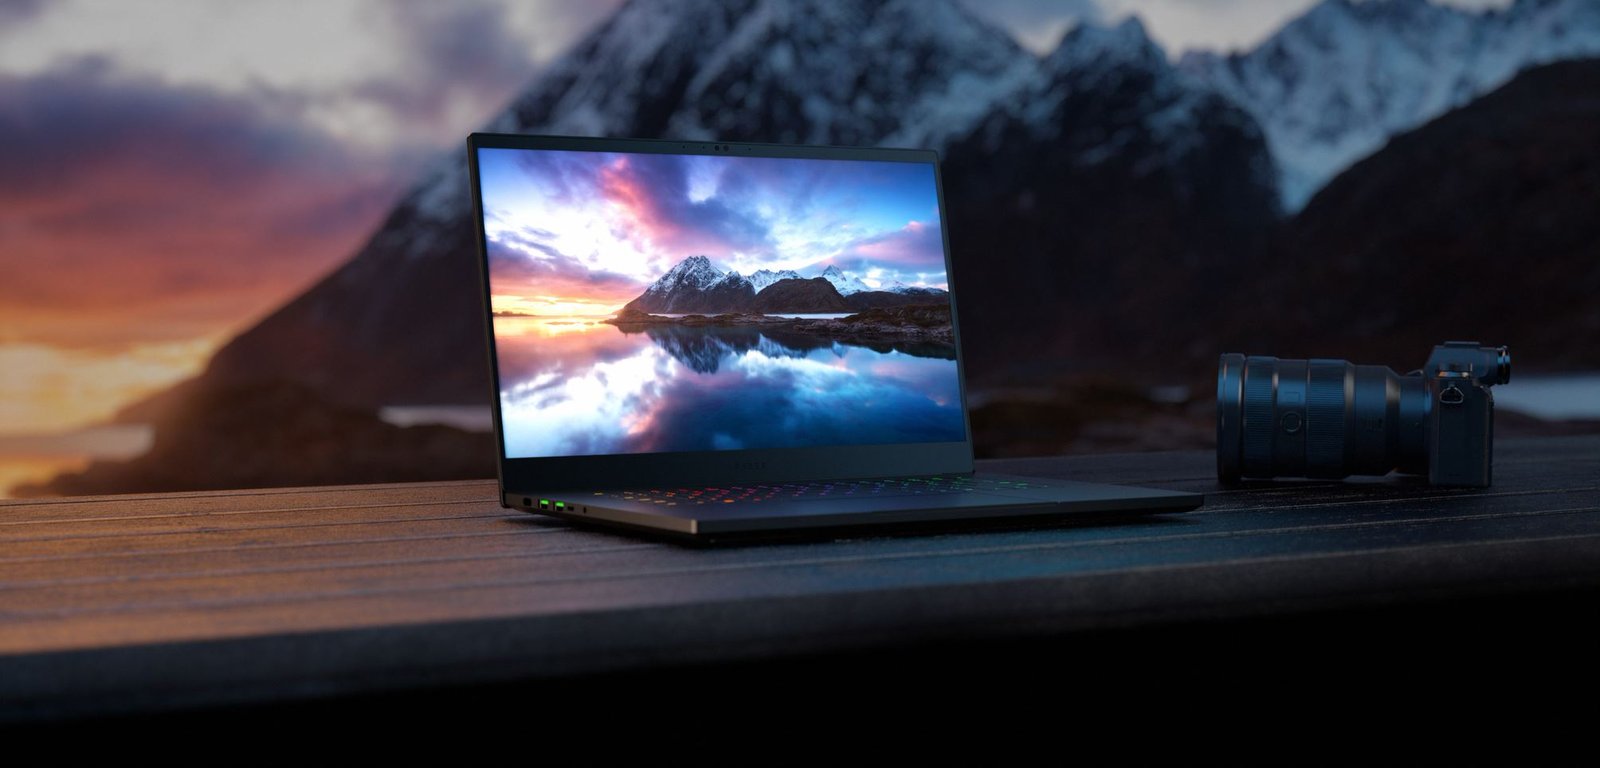 The Razer Blade 15’s 240Hz OLED panel pushes computer computer displays to fresh frontiers